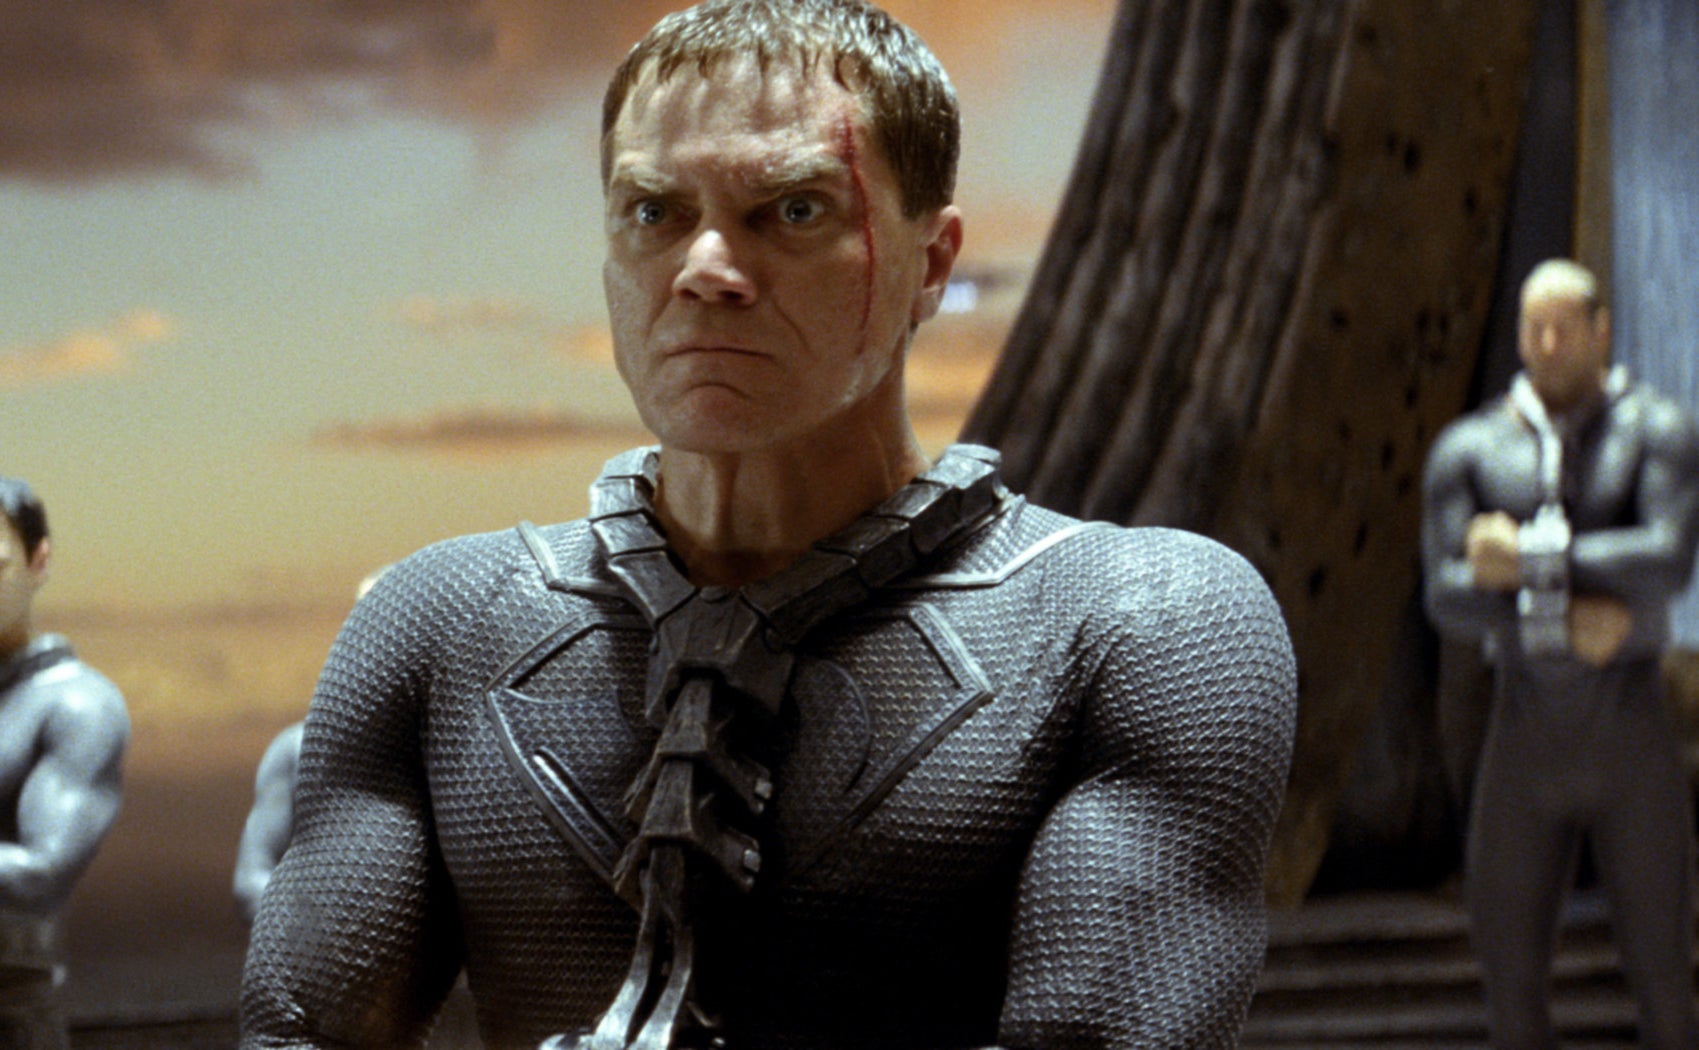 Michael Shannon looks angry while blood runs down his face